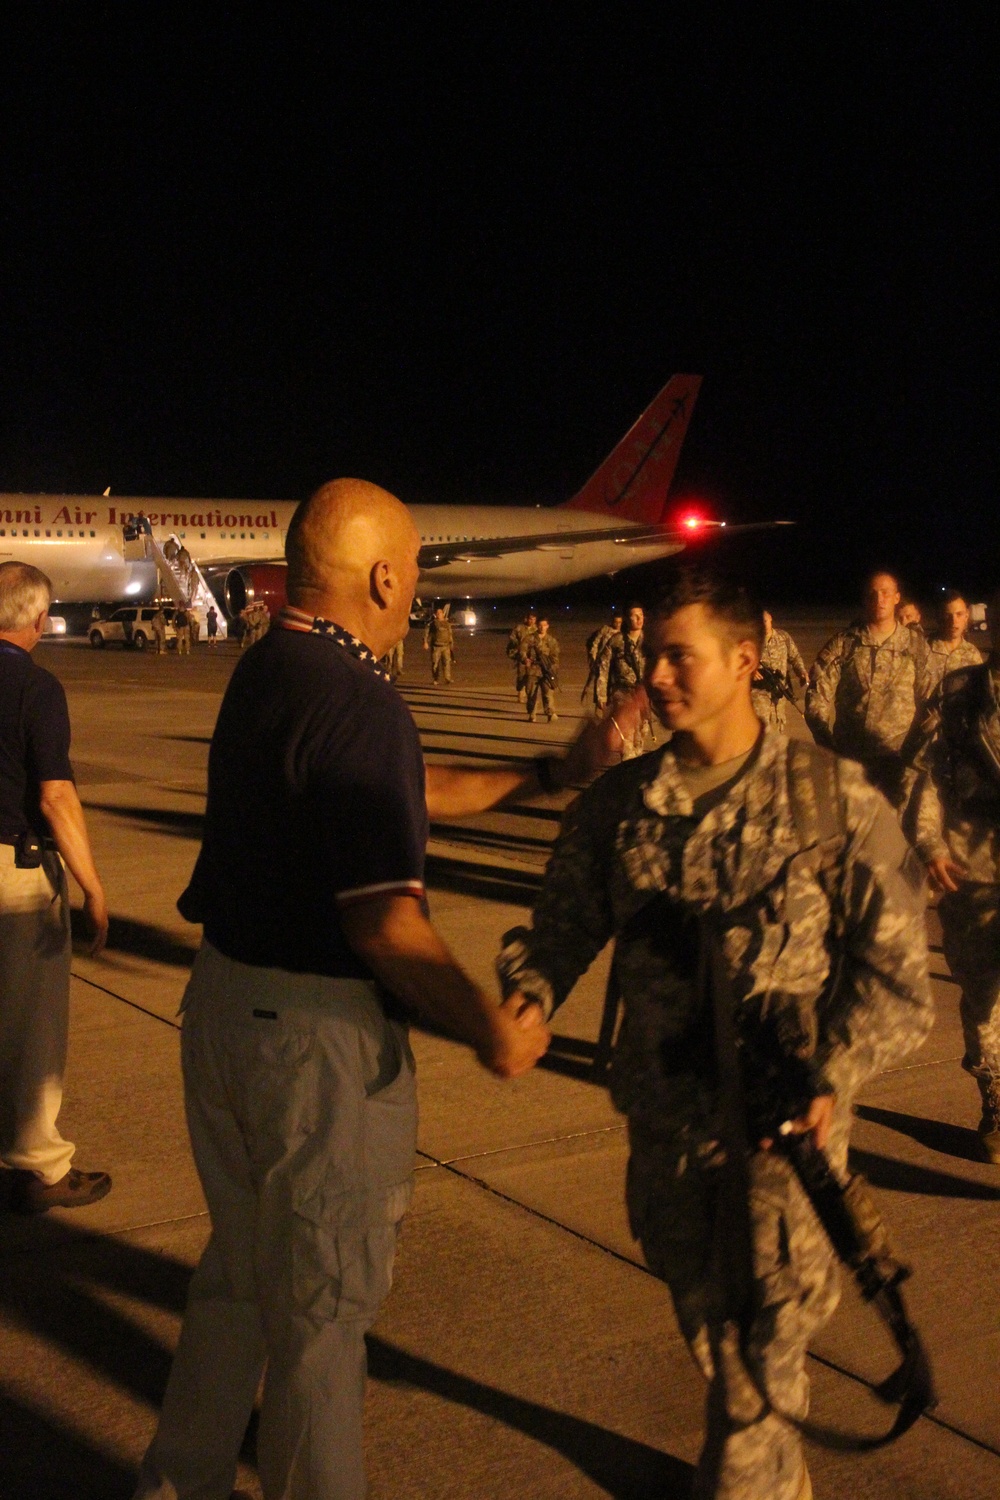 Soldiers return from Senegal training operations